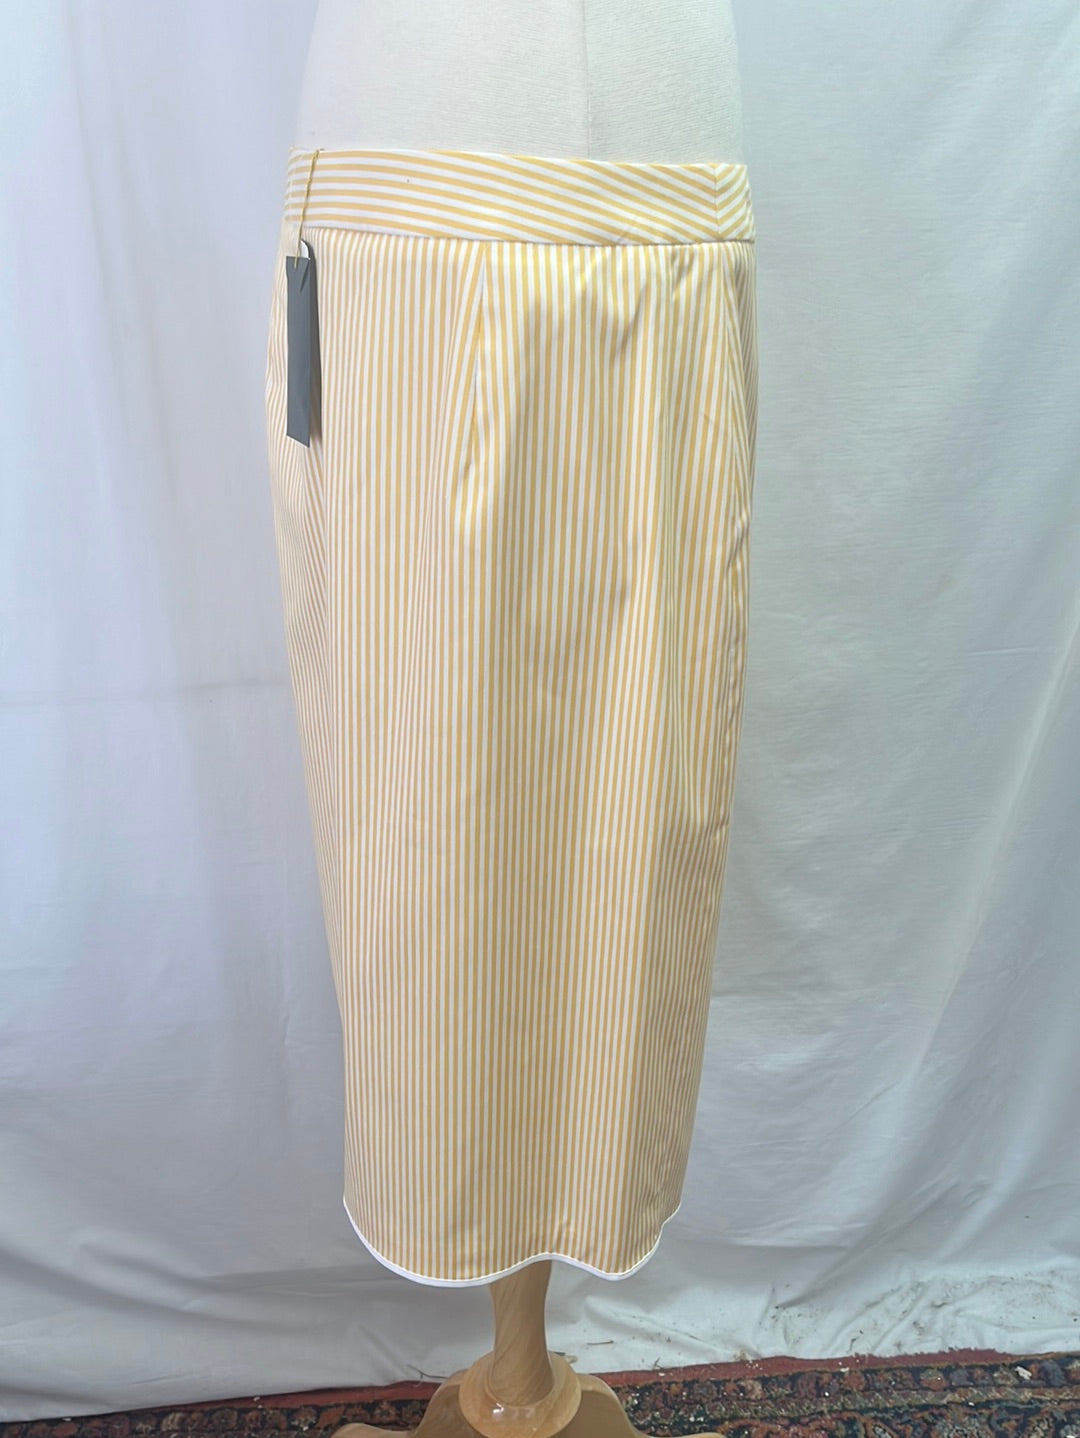 NWT -- BROOKS BROTHER'S "346" Yellow Striped Wrap Pencil Skirt -- Size 10